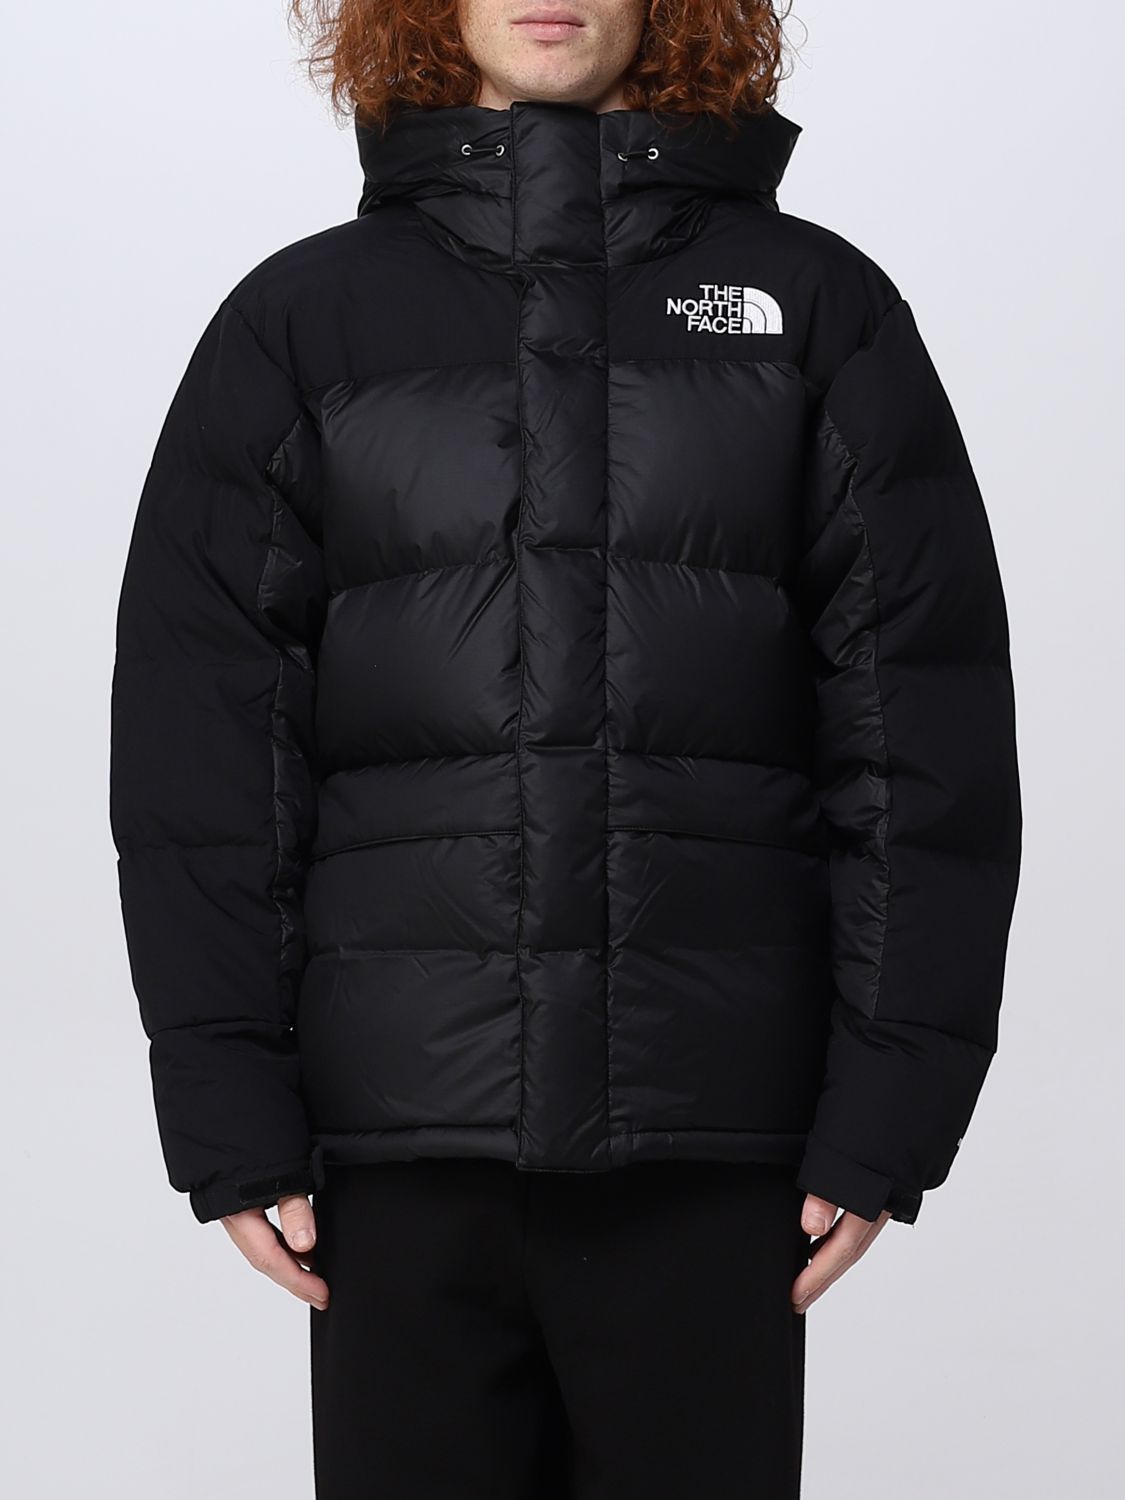 THE NORTH FACE: blazer for man - Black | The North Face blazer NF0A4QYX ...